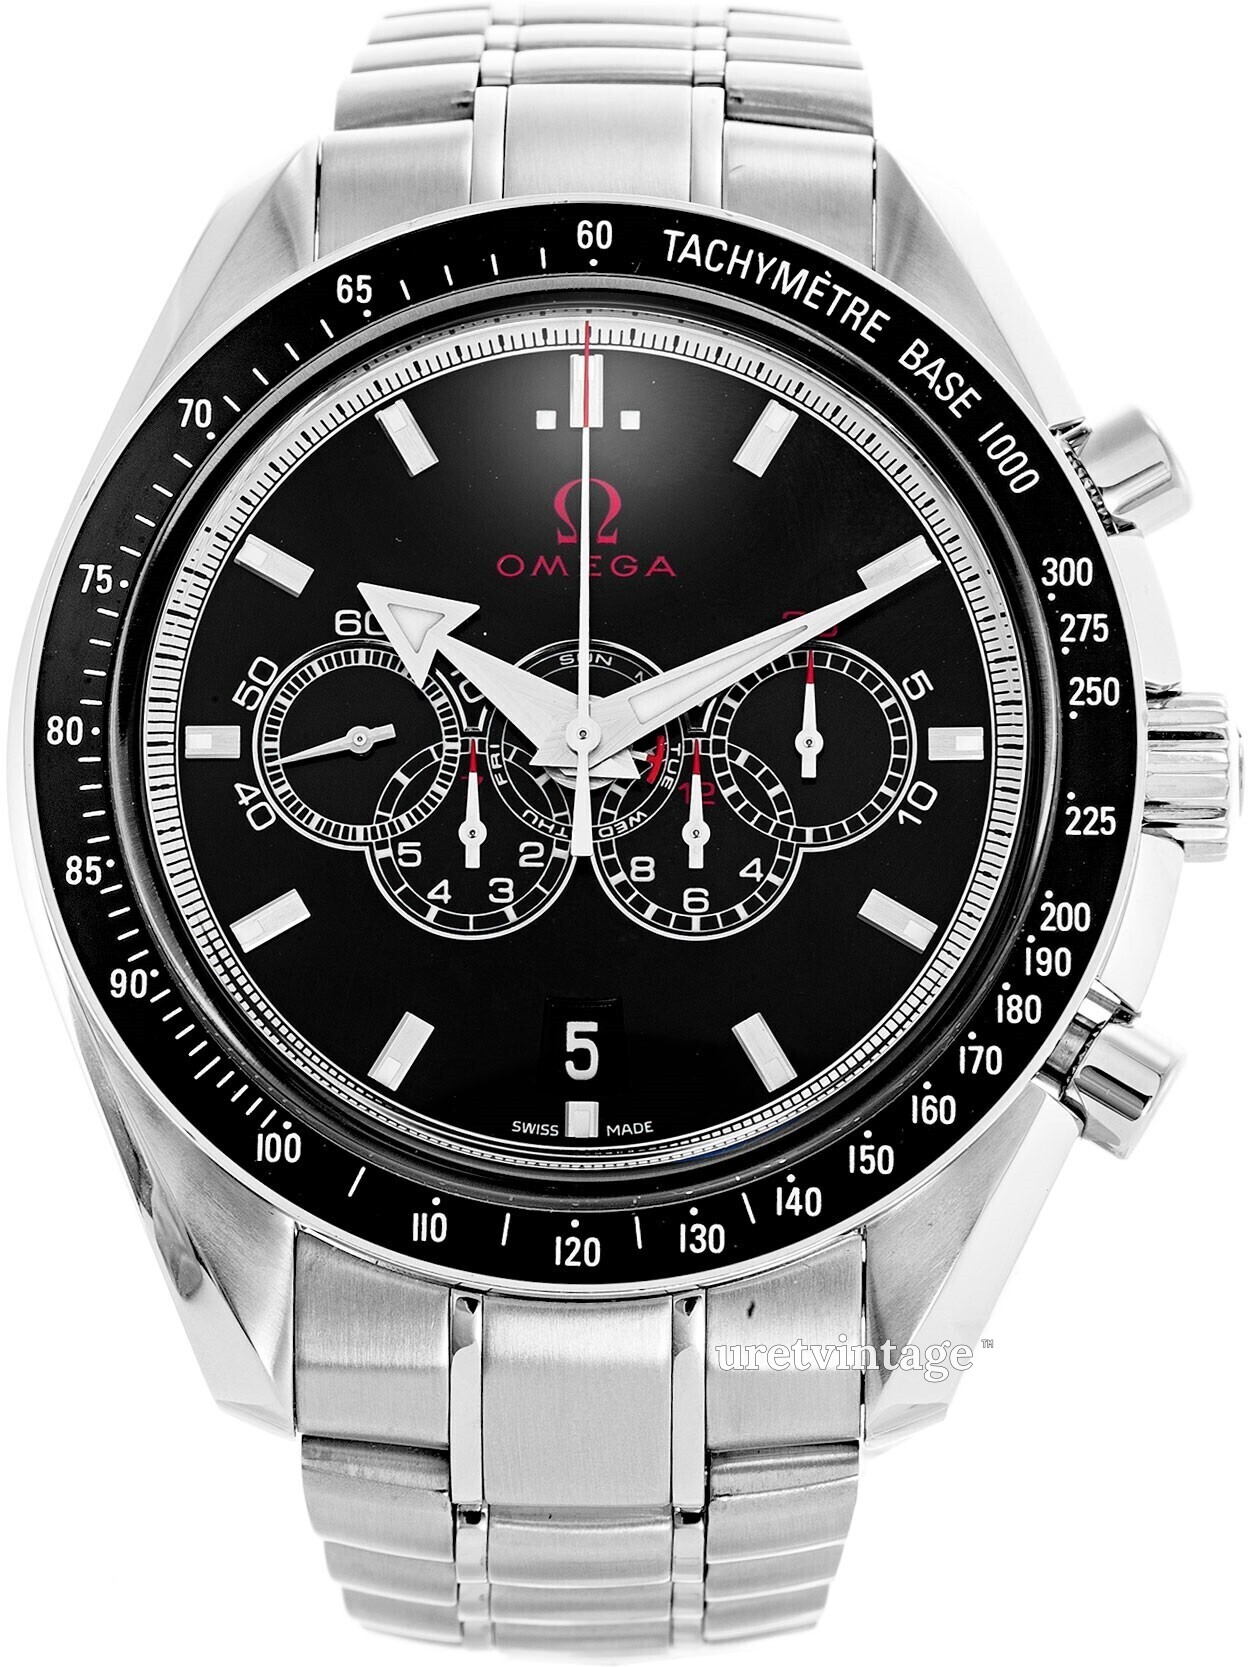 522.30.41.20.01.001 Omega Specialities Olympic Collection 58 895 kr